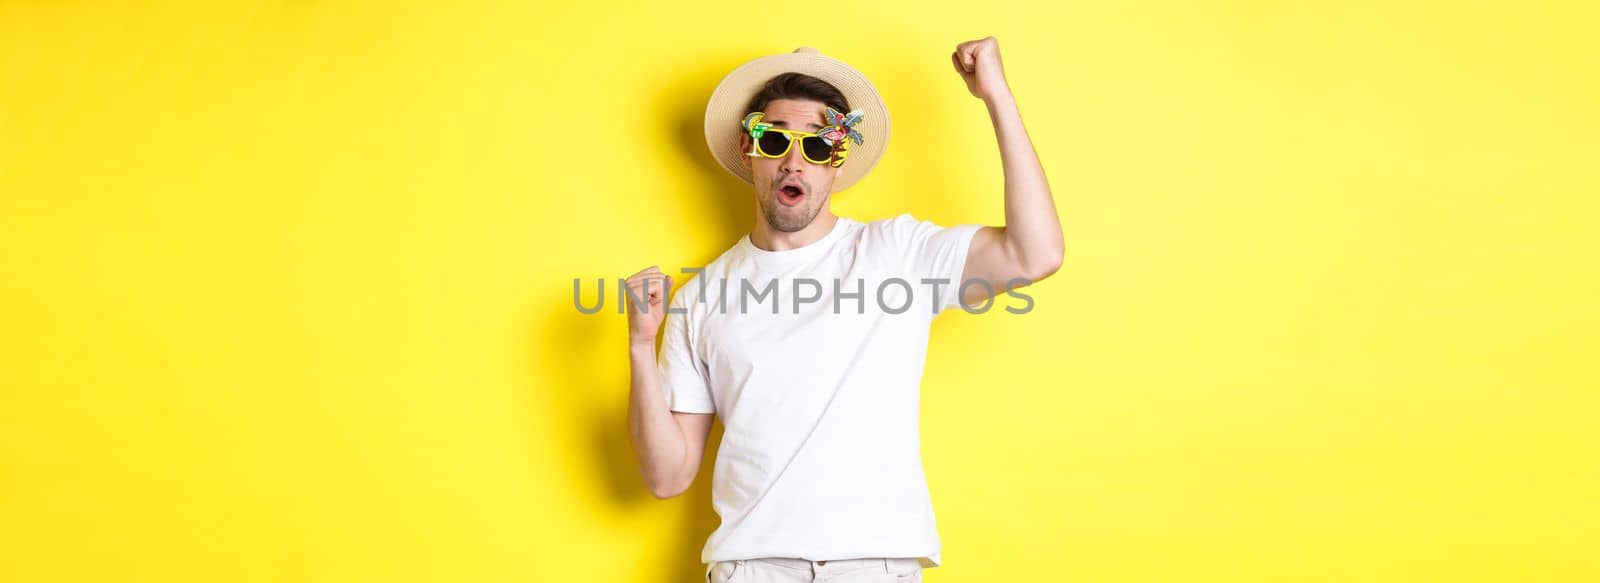 Concept of tourism and lifestyle. Happy guy tourist enjoying trip, rooting for you, fist pump and triumphing, going on journey in summer hat and sunglasses, yellow background.